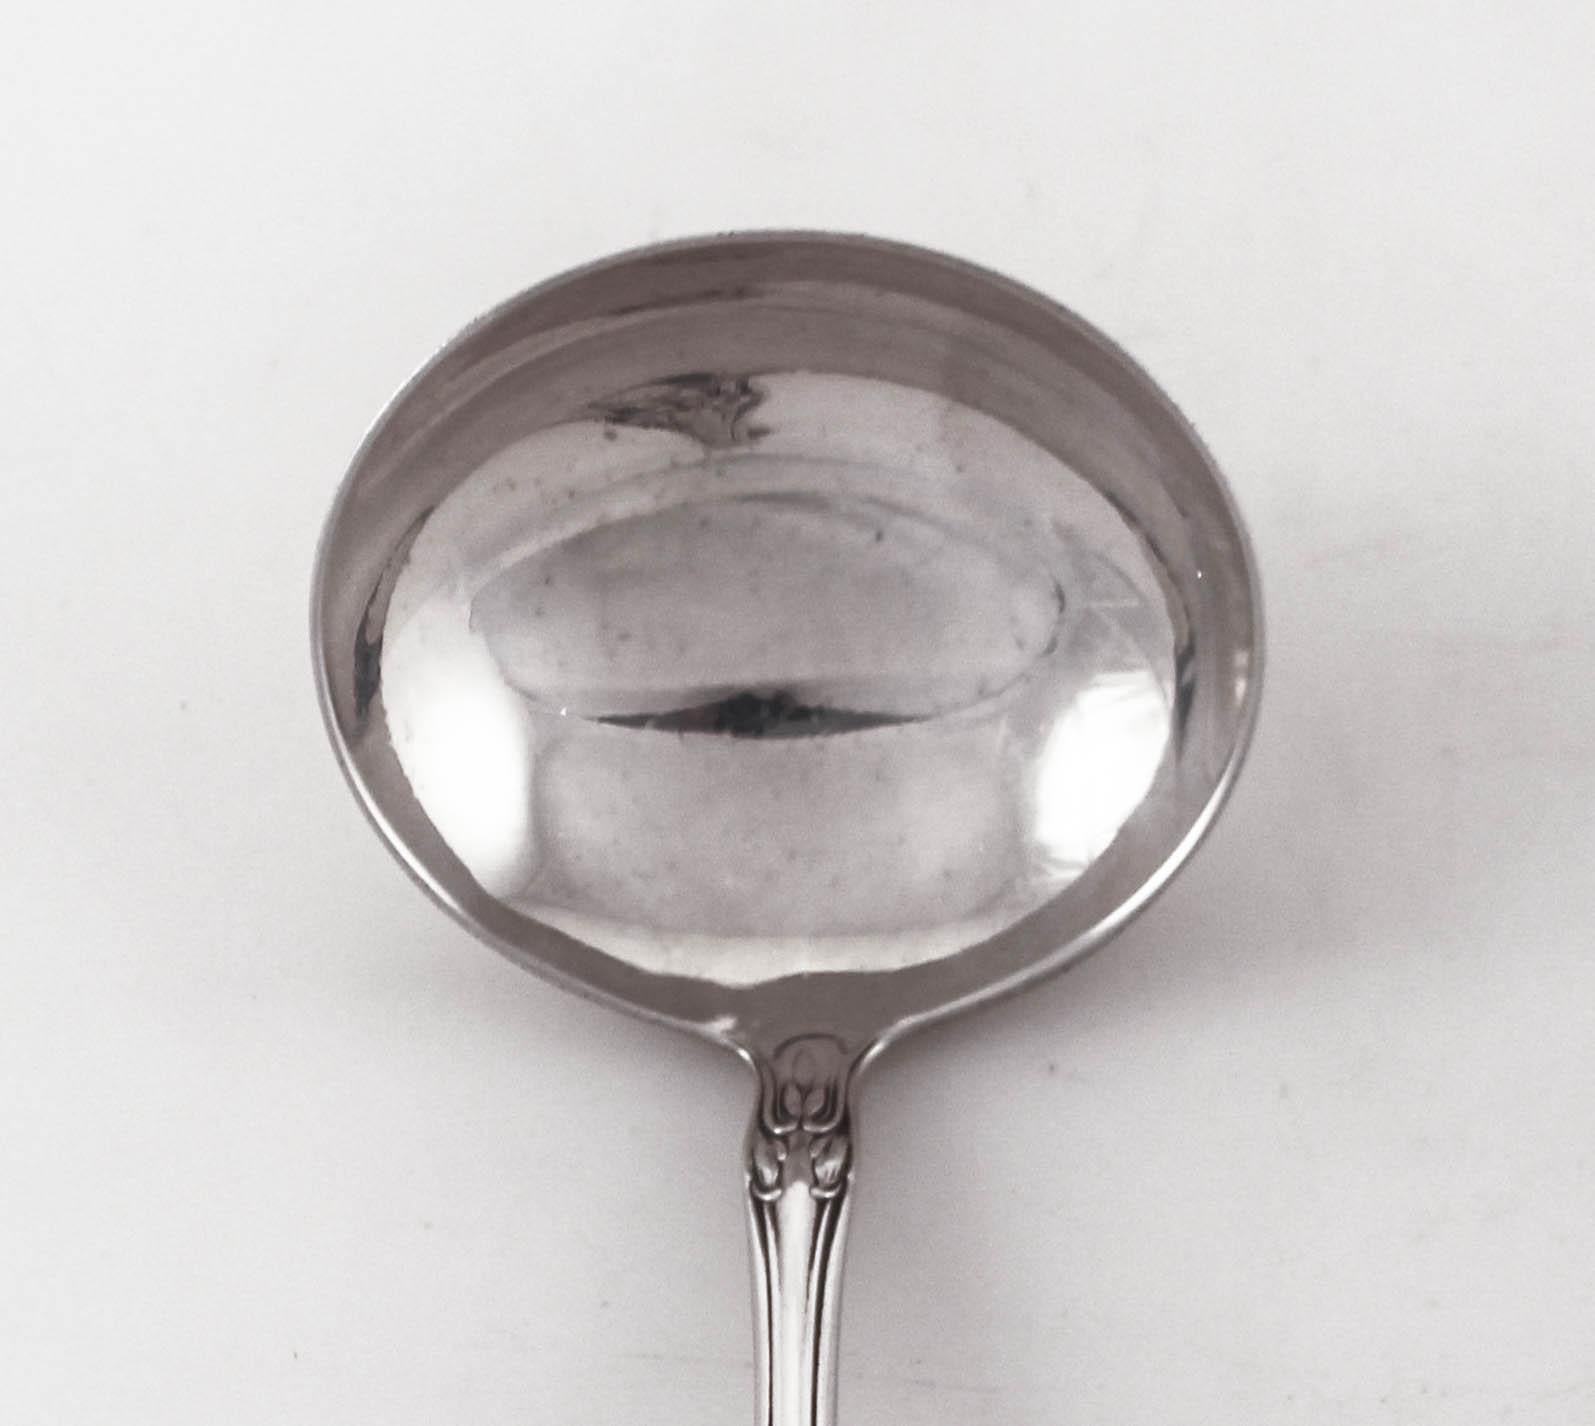 Being offered is a sterling silver gravy ladle in the “Chateau Rose” pattern by the Alvin Silver Company from 1941. It has a scalloped handle with flowers along the rim. It has an understated design in keeping with the period of WWII.